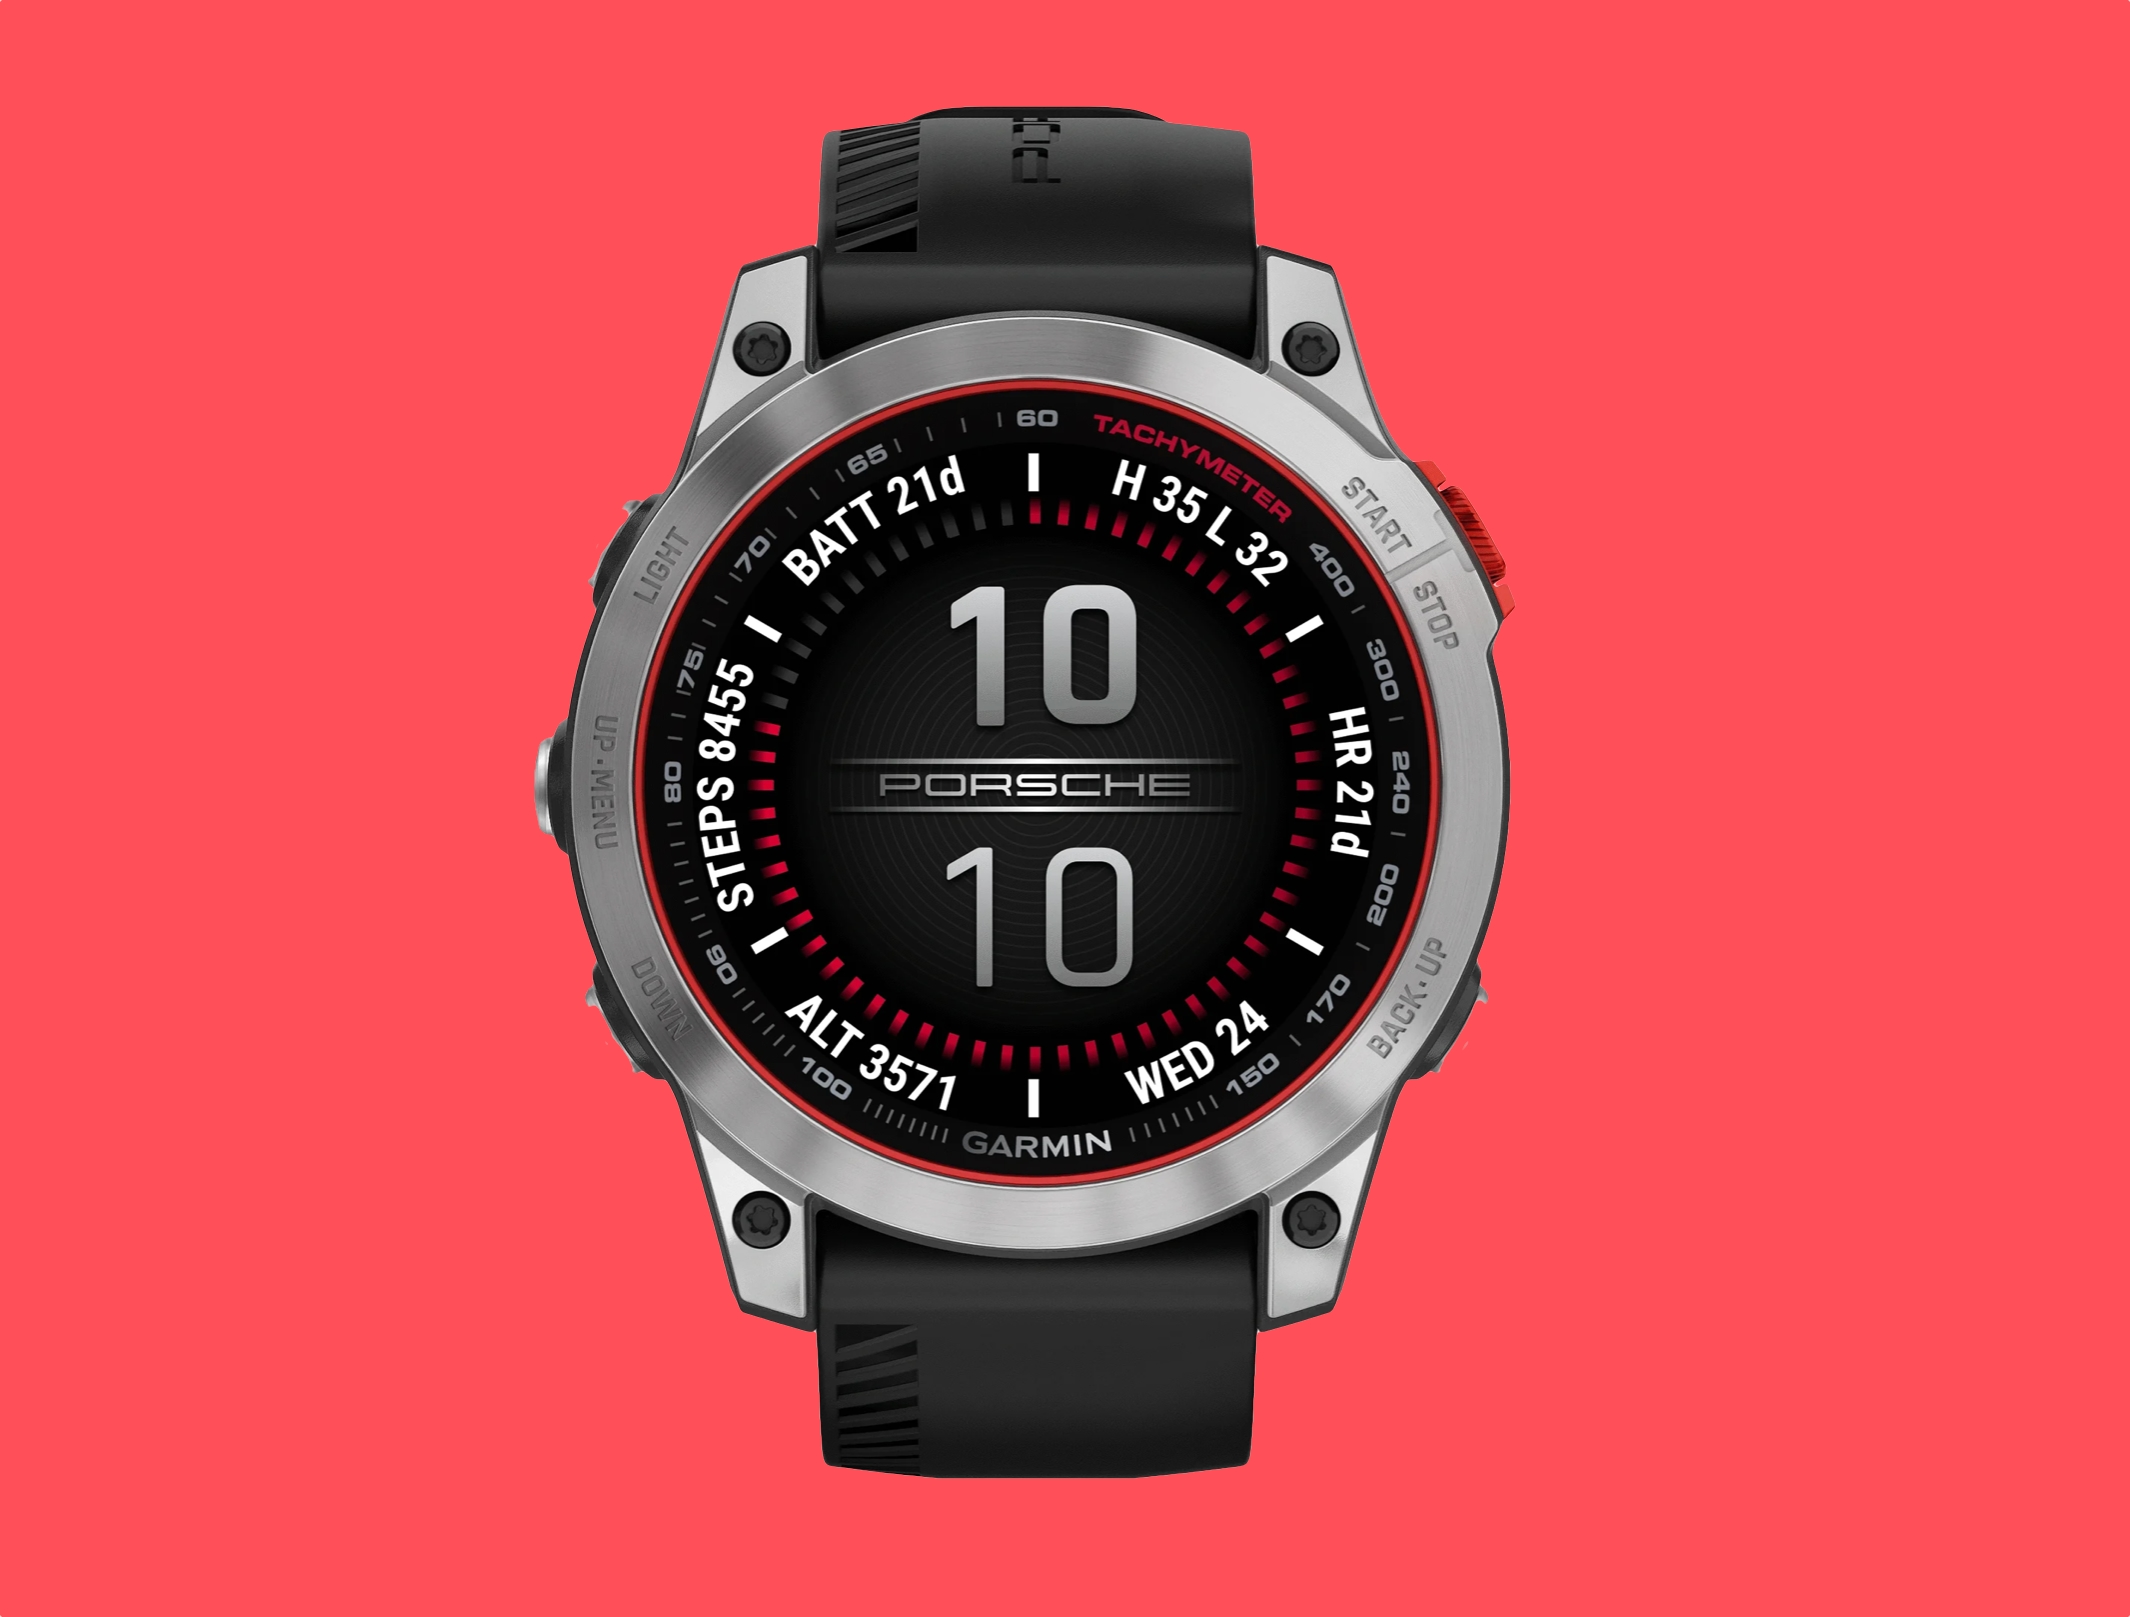 Porsche and Garmin unveiled a special version of the Epix 2 multisport watch for $1250